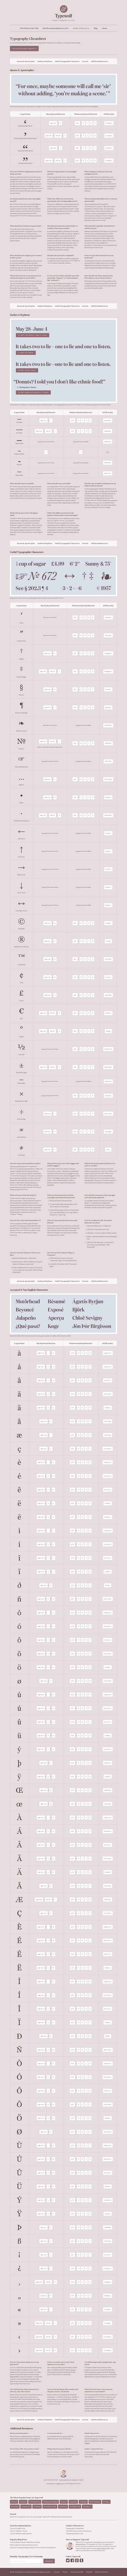 Typography Cheatsheet → A Comprehensive Guide to Smart Quotes, Dashes & Other Typographic Charact…